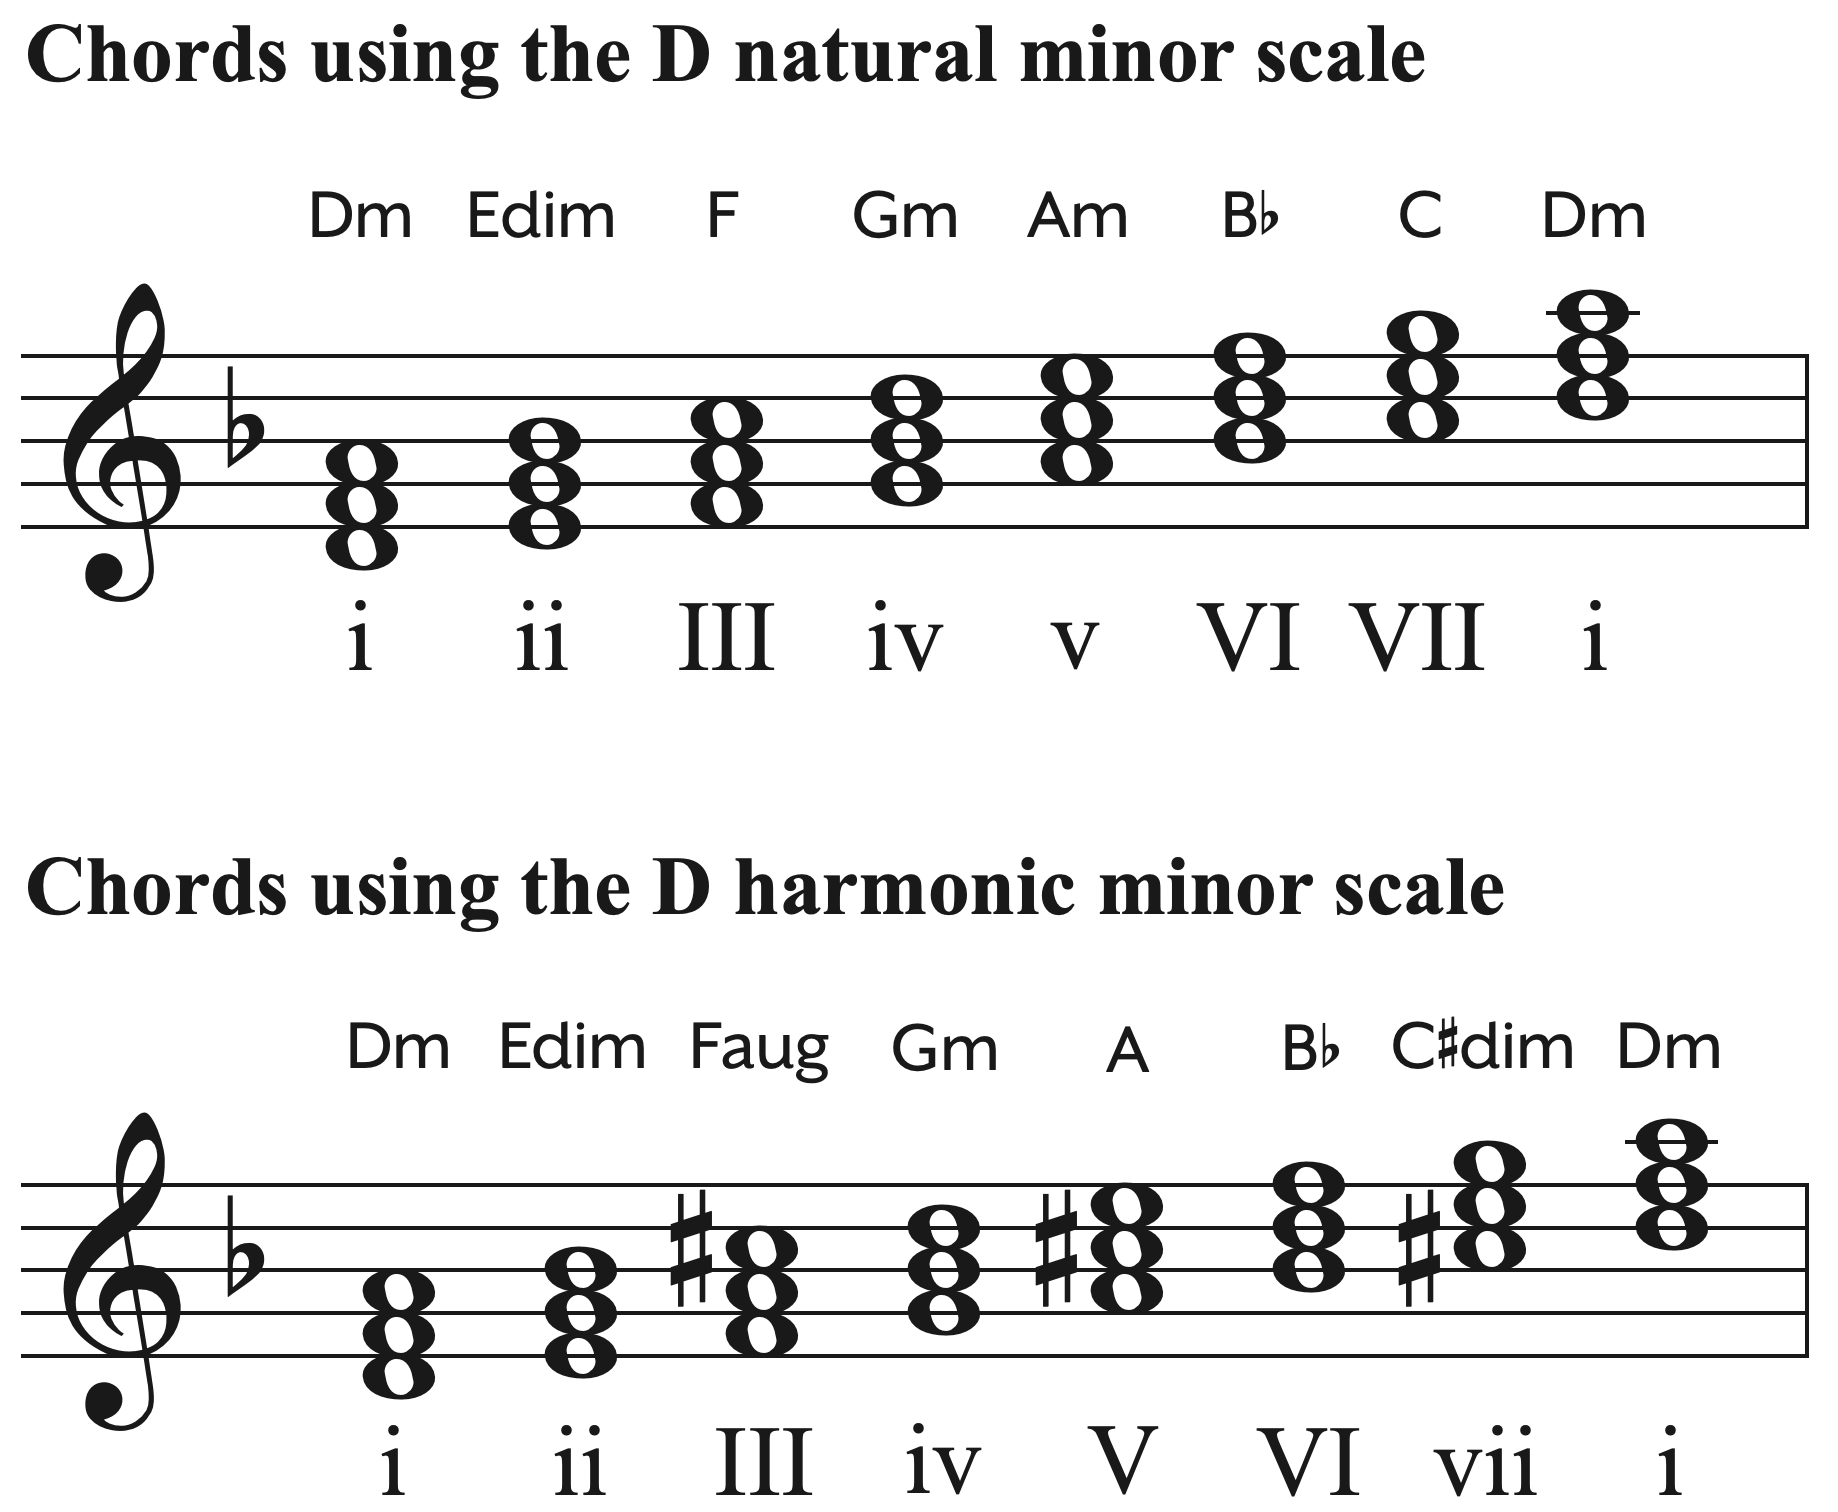 Chords using the D natural minor scale and chords using the D harmonic minor scale